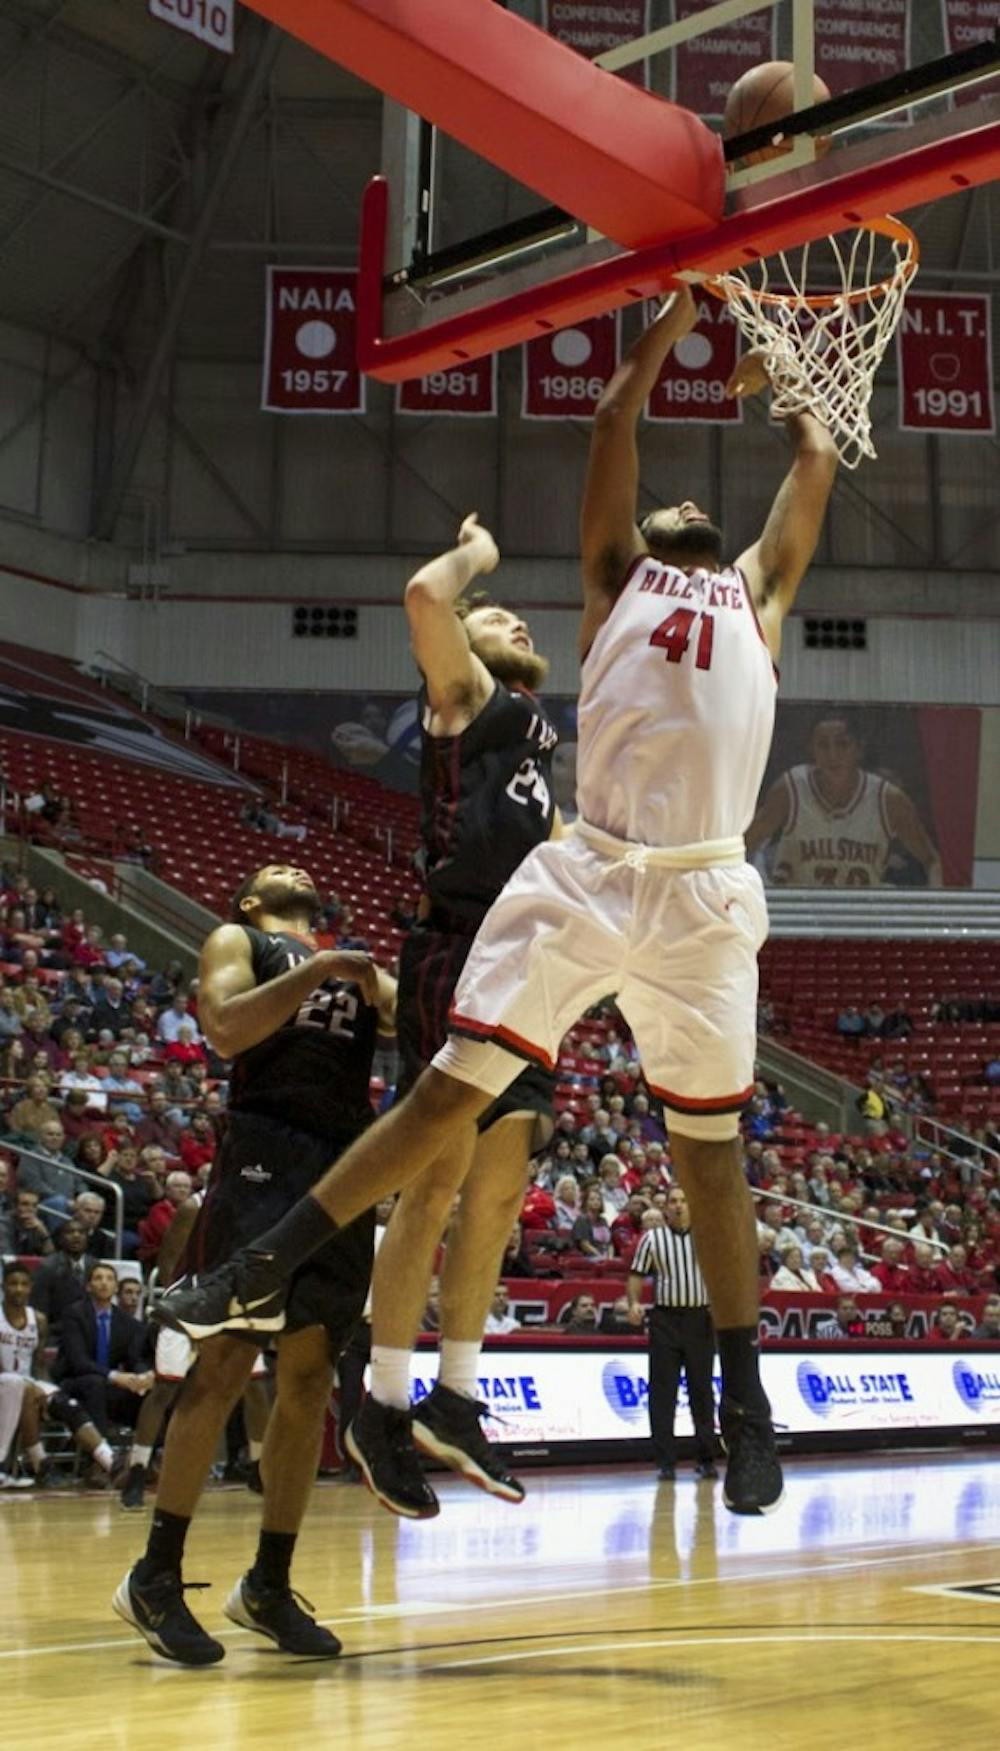 <p>Trey Moses, a freshman forward center for the Ball State Cardinals, attempts to score a layup during the game against IUPUI on Dec. 1 in John E.&nbsp;Worthen Arena. <em>DN PHOTO GRACE RAMEY</em></p>